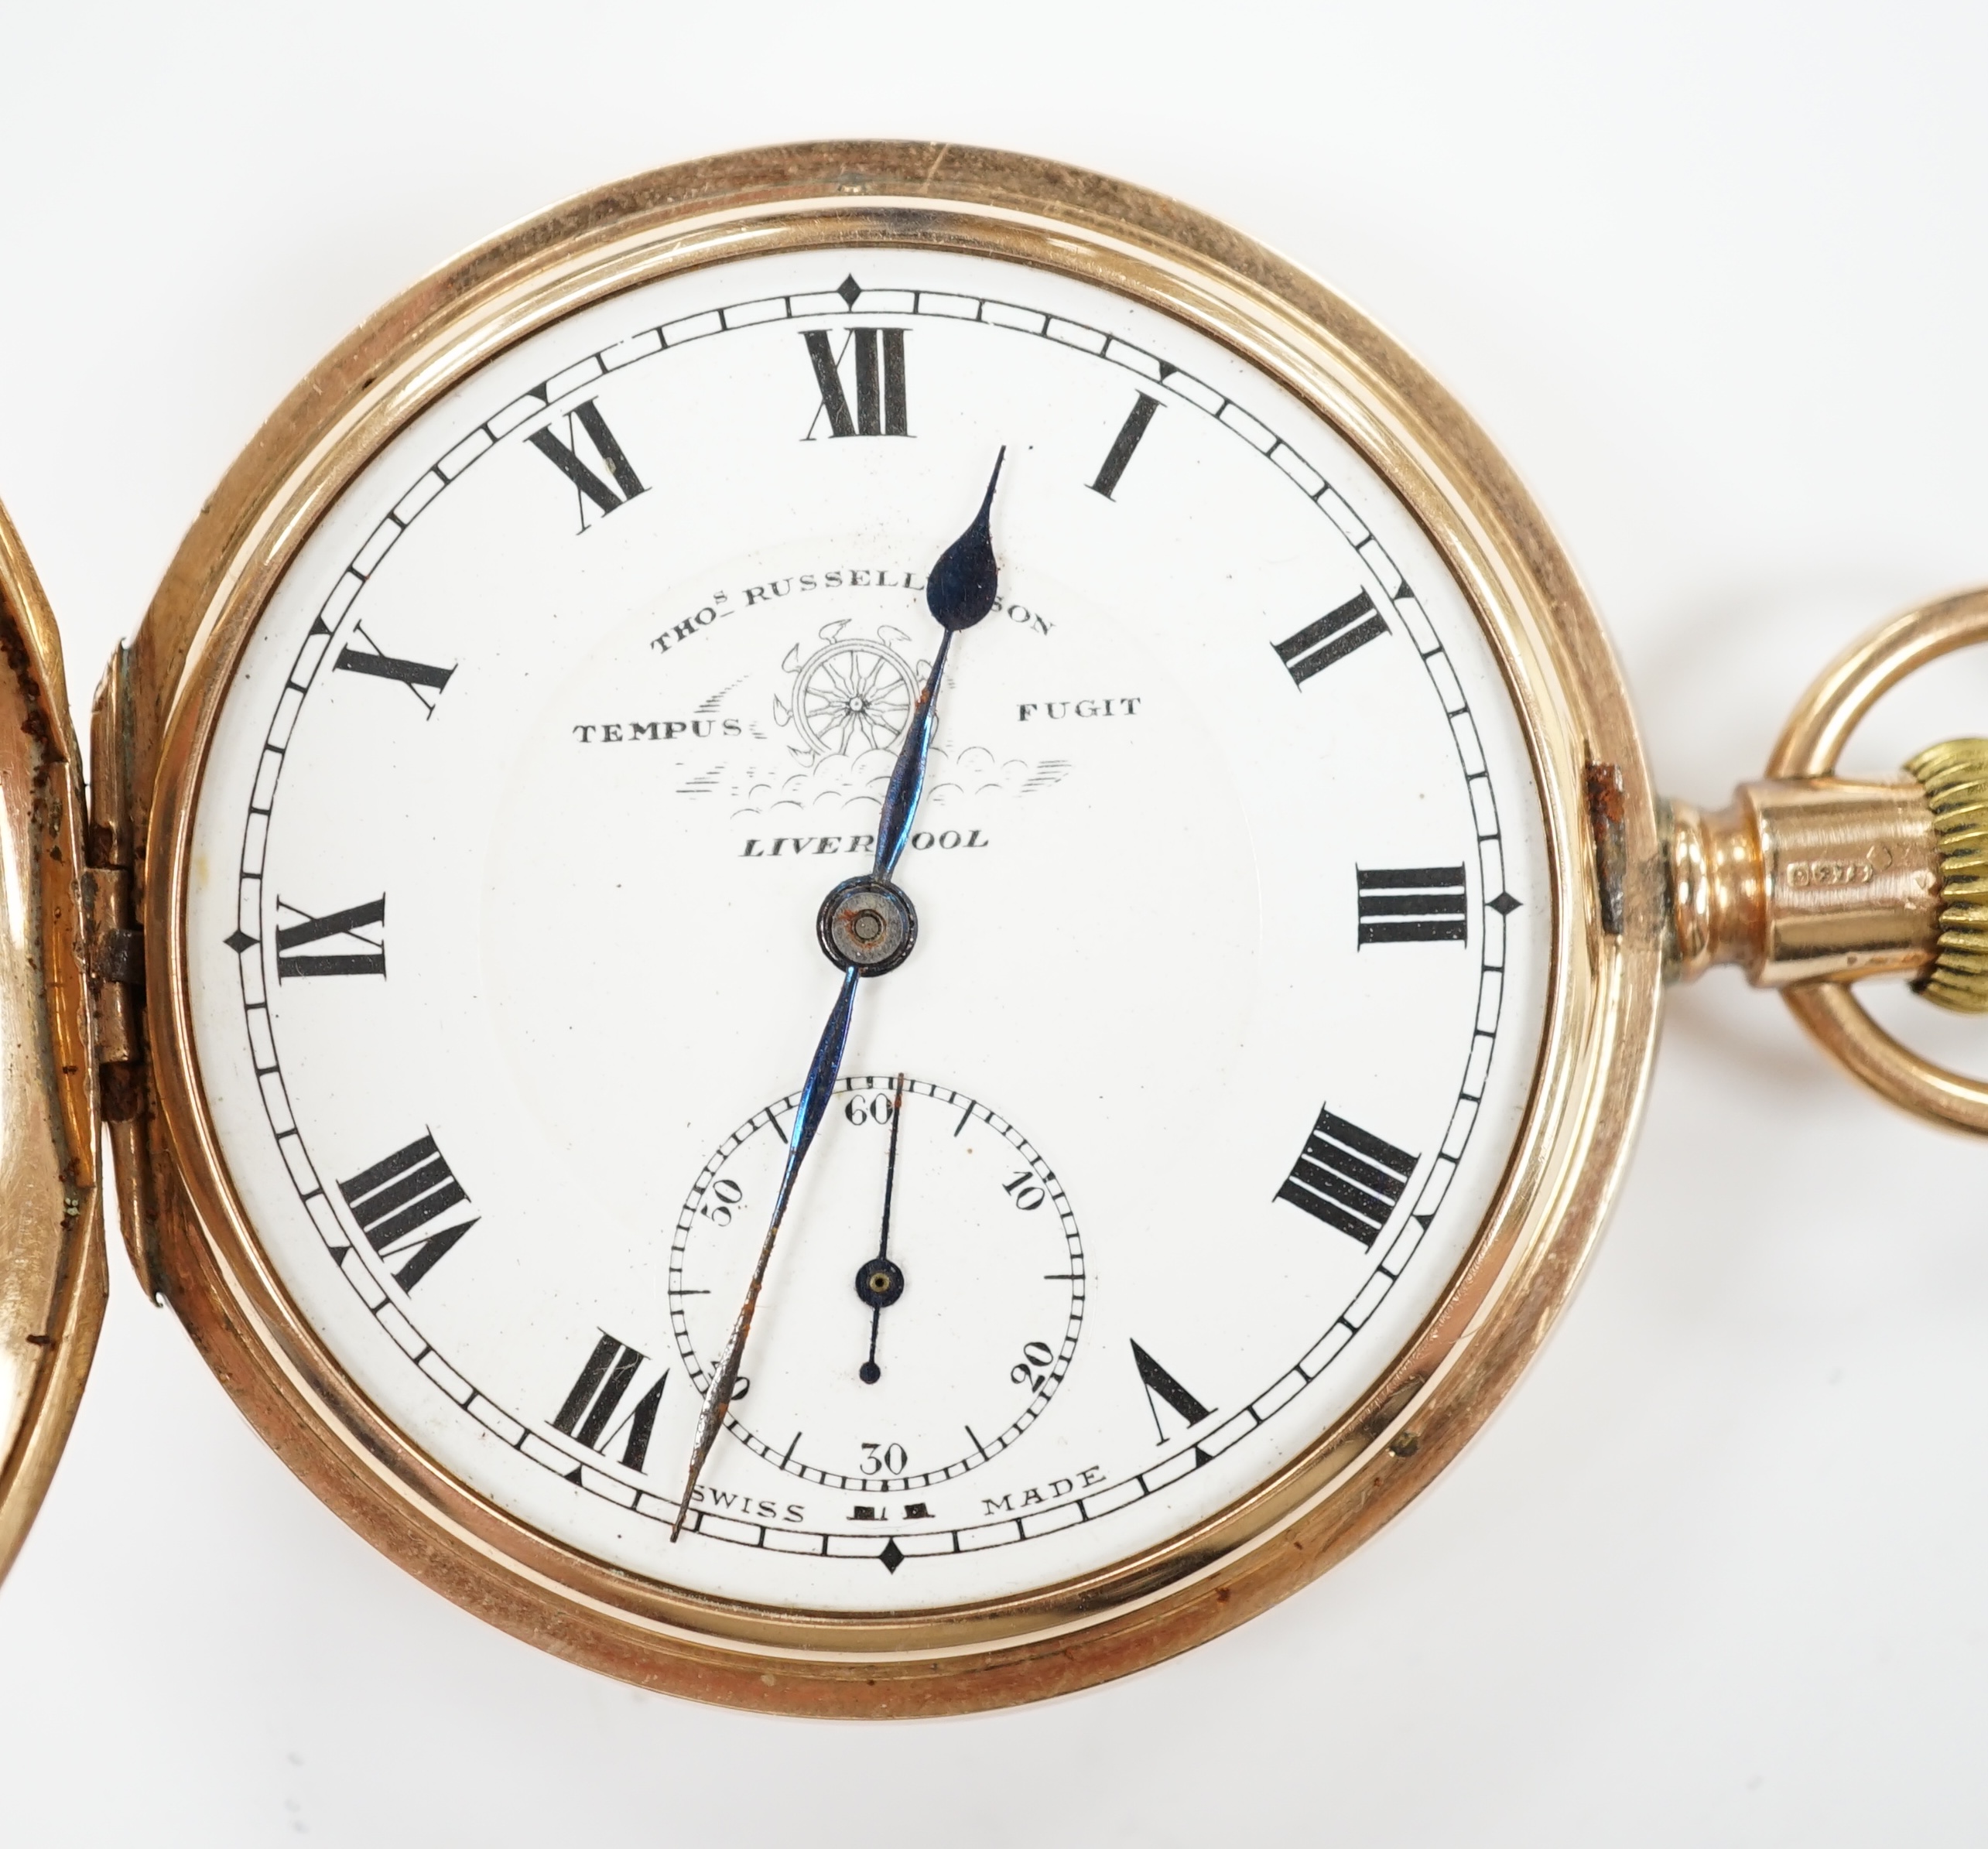 A George V 9ct gold keyless hunter pocket watch, by Thomas Russell & Sons Ltd of Liverpool, with Roman dial and subsidiary seconds (lacking glass), case diameter 50mm, gross weight 90 grams.